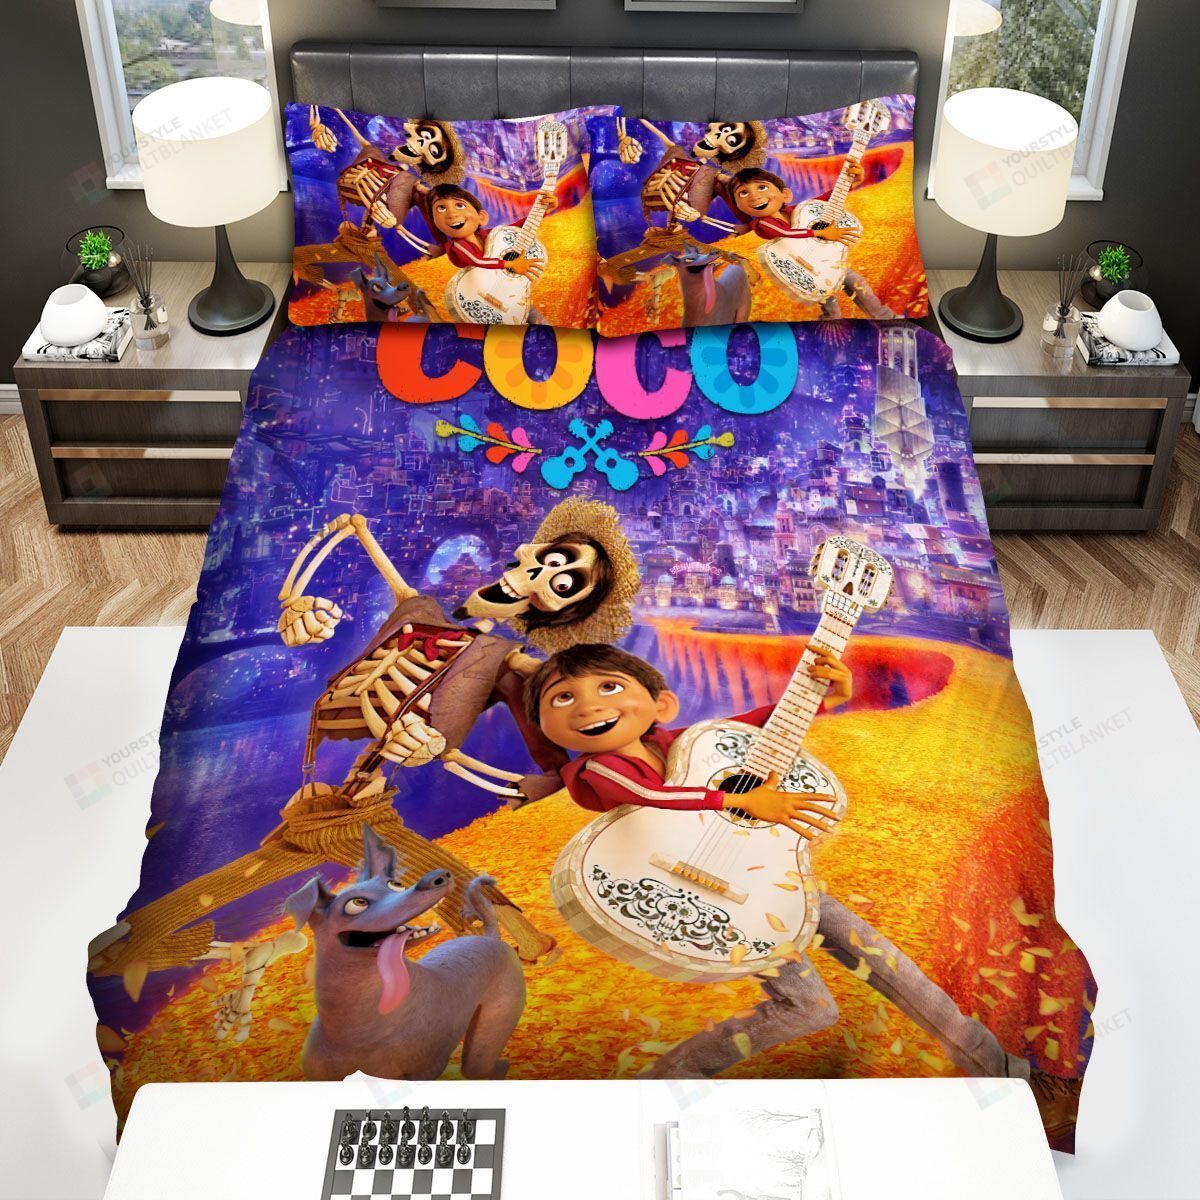 Coco Characters Bed Sheets Spread Comforter Duvet Cover Bedding Sets